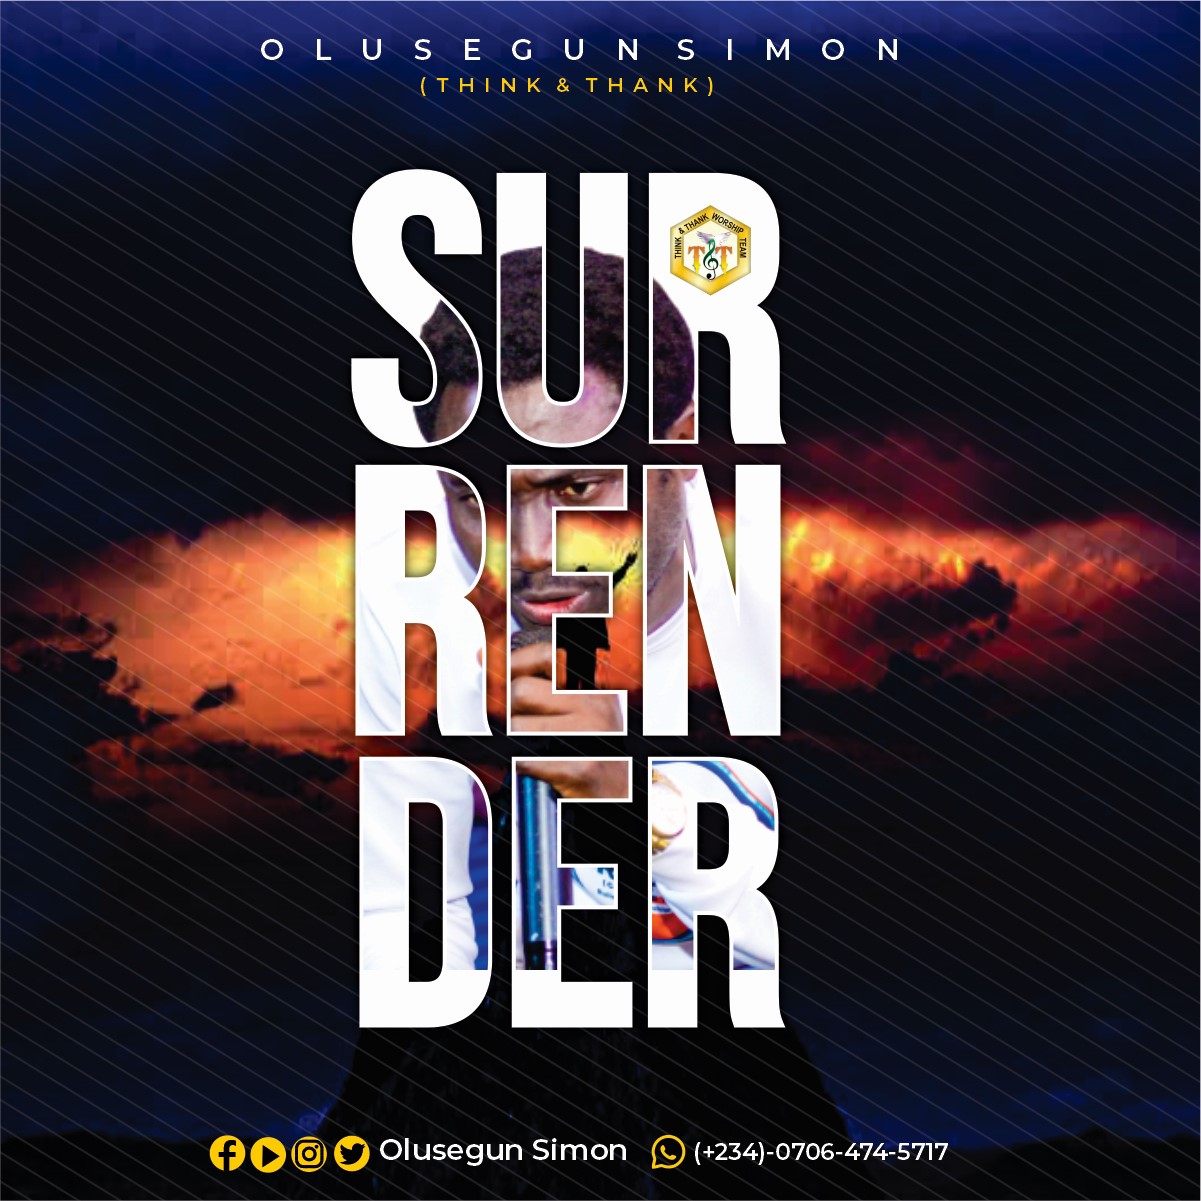 Download Song: SURRENDER by Olusegun Simon 21